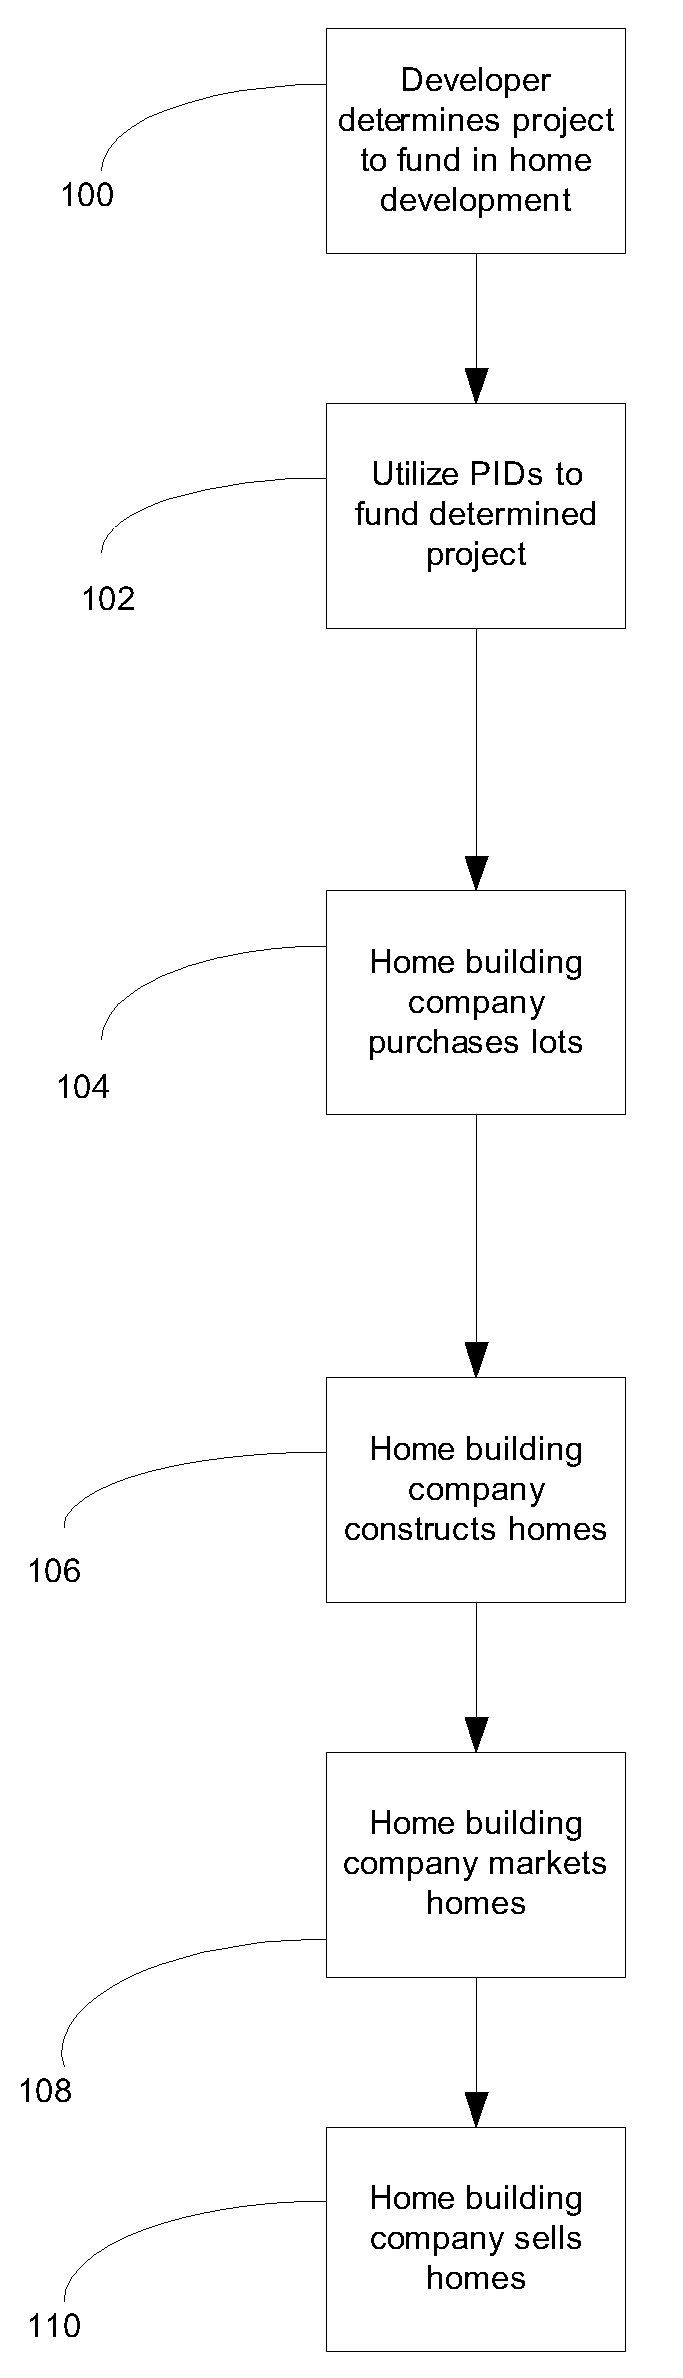 Financial arrangement for utilizing public improvement districts for funding housing projects